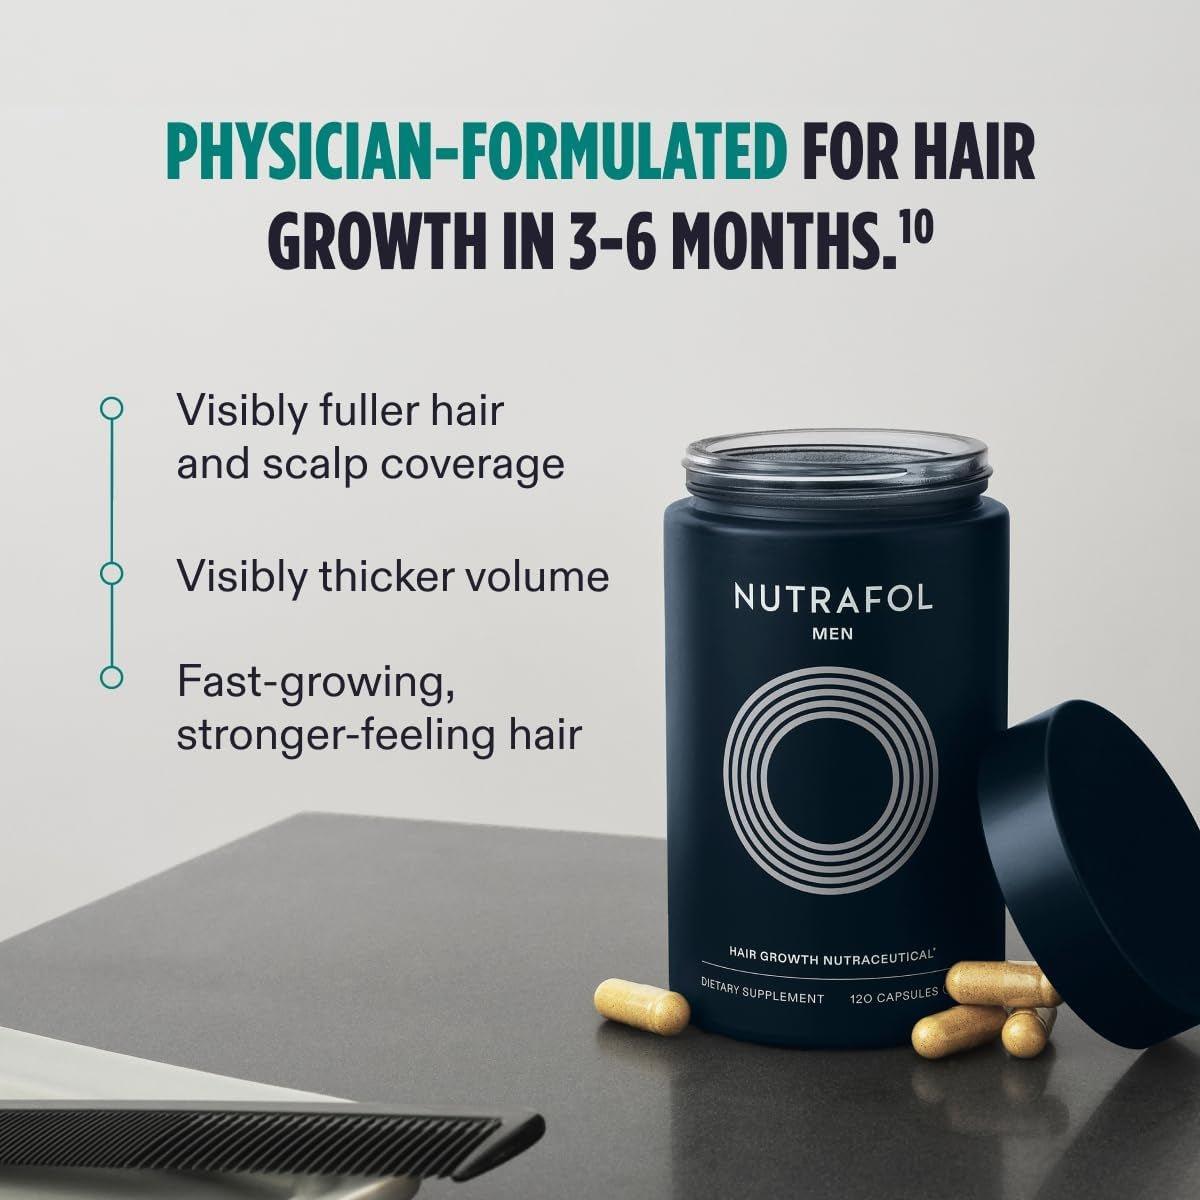 Nutrafol Men Hair Growth Supplements - 1 Month Supply (120 Capsules) - Glam Global UK